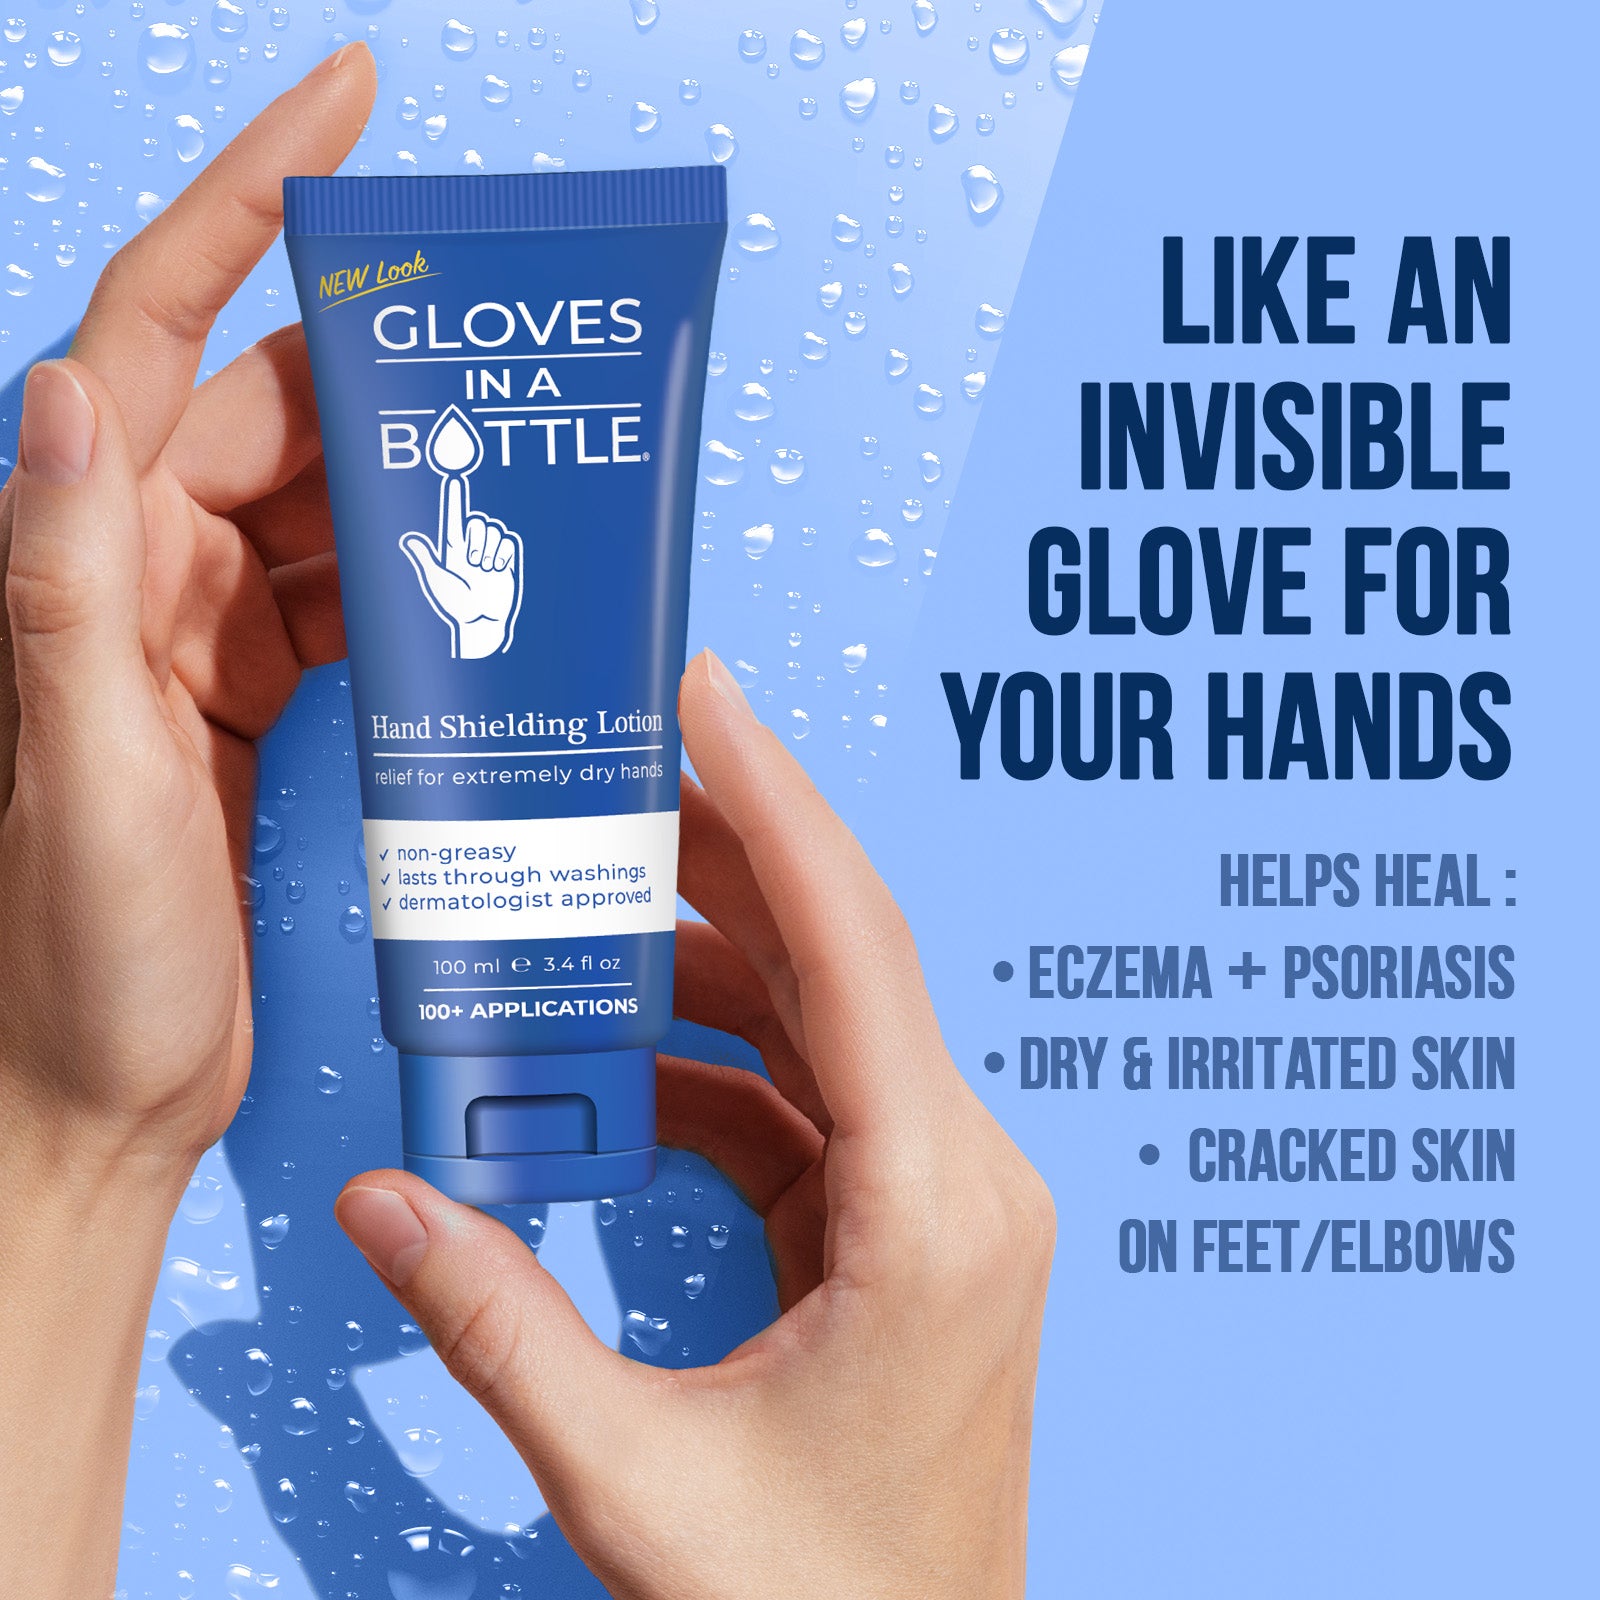 Gloves In A Bottle Hand Shielding Lotion for Dry Skin, 3.4 Ounce, 4 pack